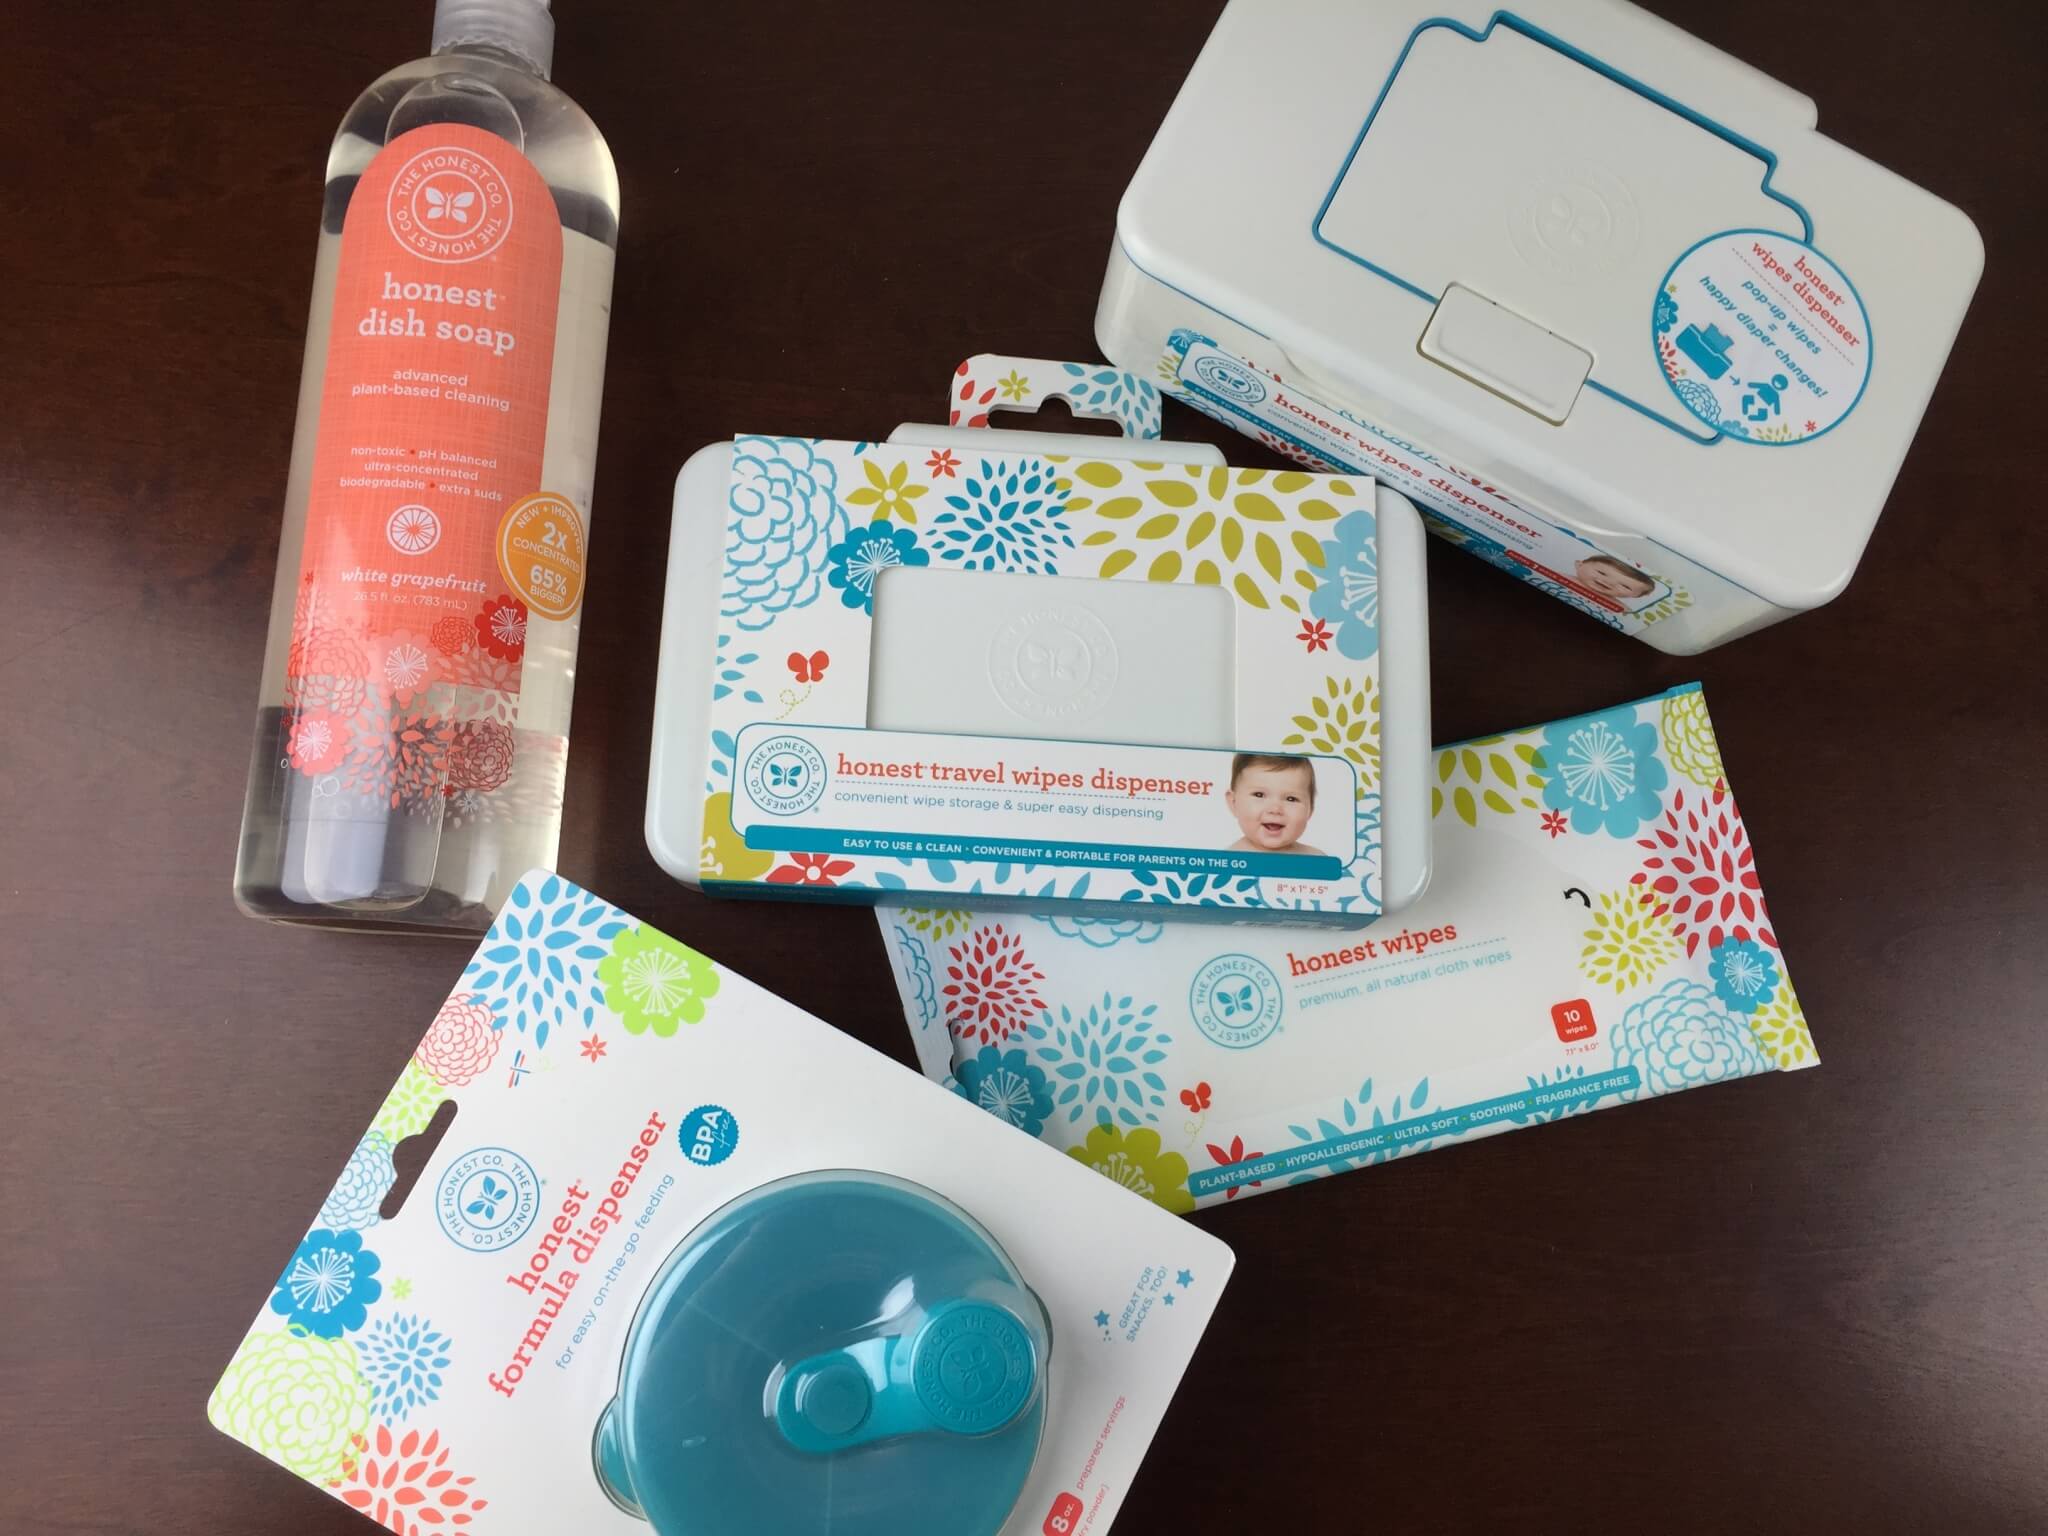 https://hellosubscription.com/wp-content/uploads/2015/04/honest-company-baby-wipes-holders.jpg?quality=90&strip=all